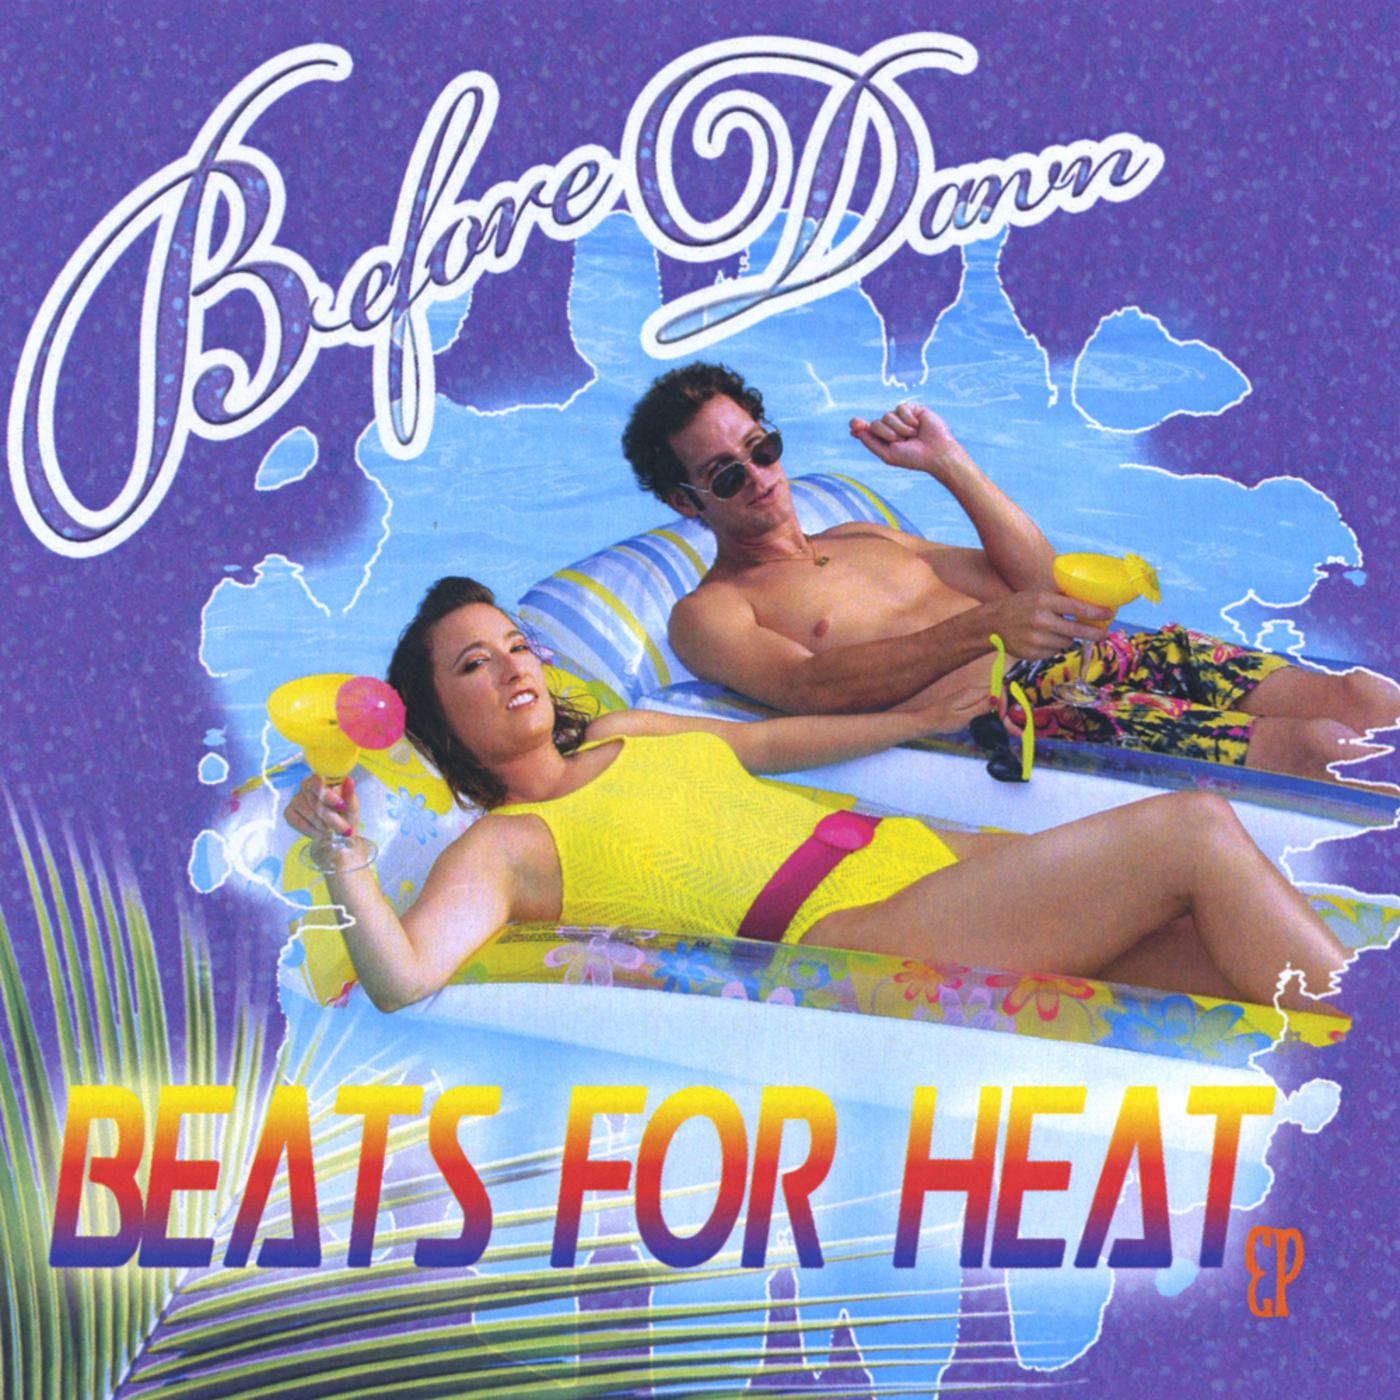 Beats for Heat Ep